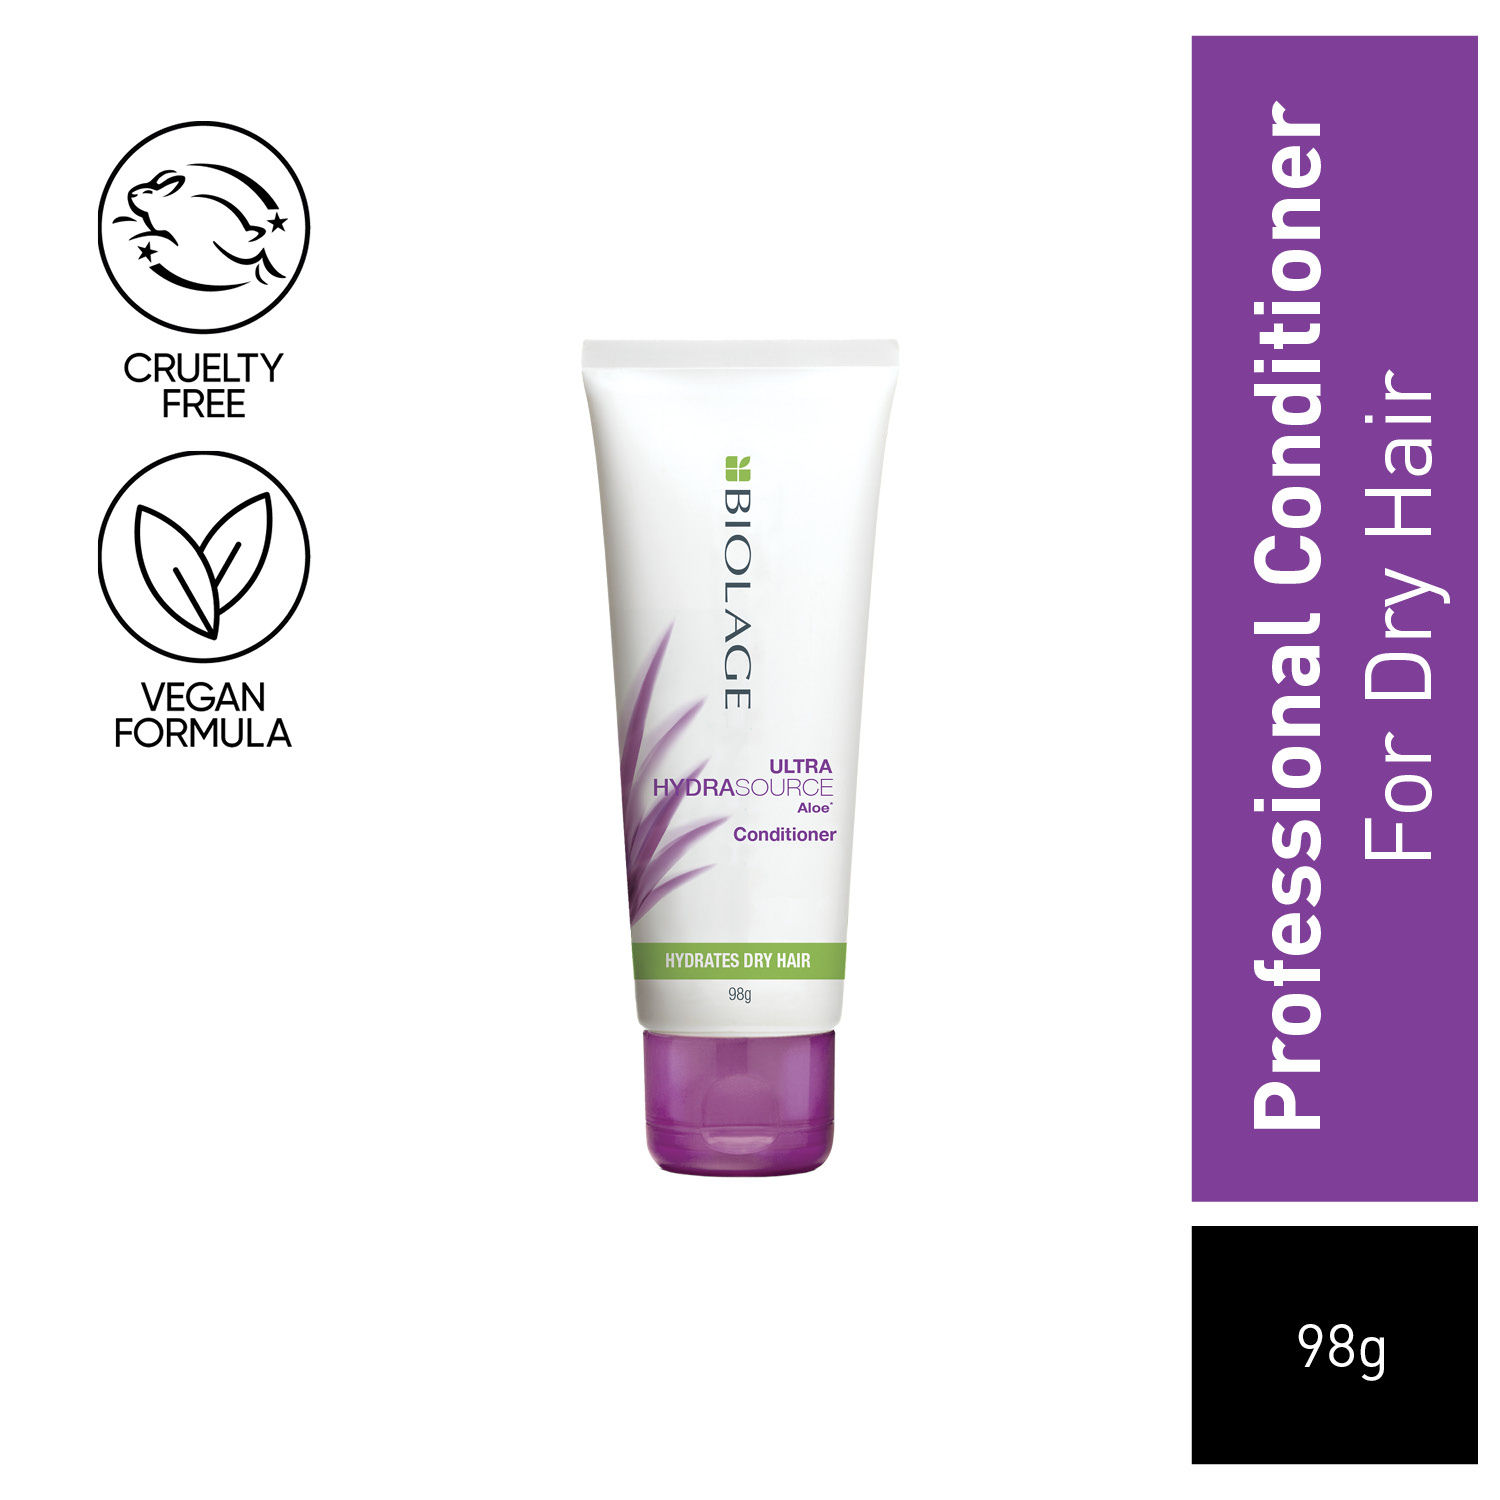 Buy BIOLAGE Hydrasource Conditioner 98g | Paraben free|Intensely hydrates dry hair | For Dry Hair - Purplle